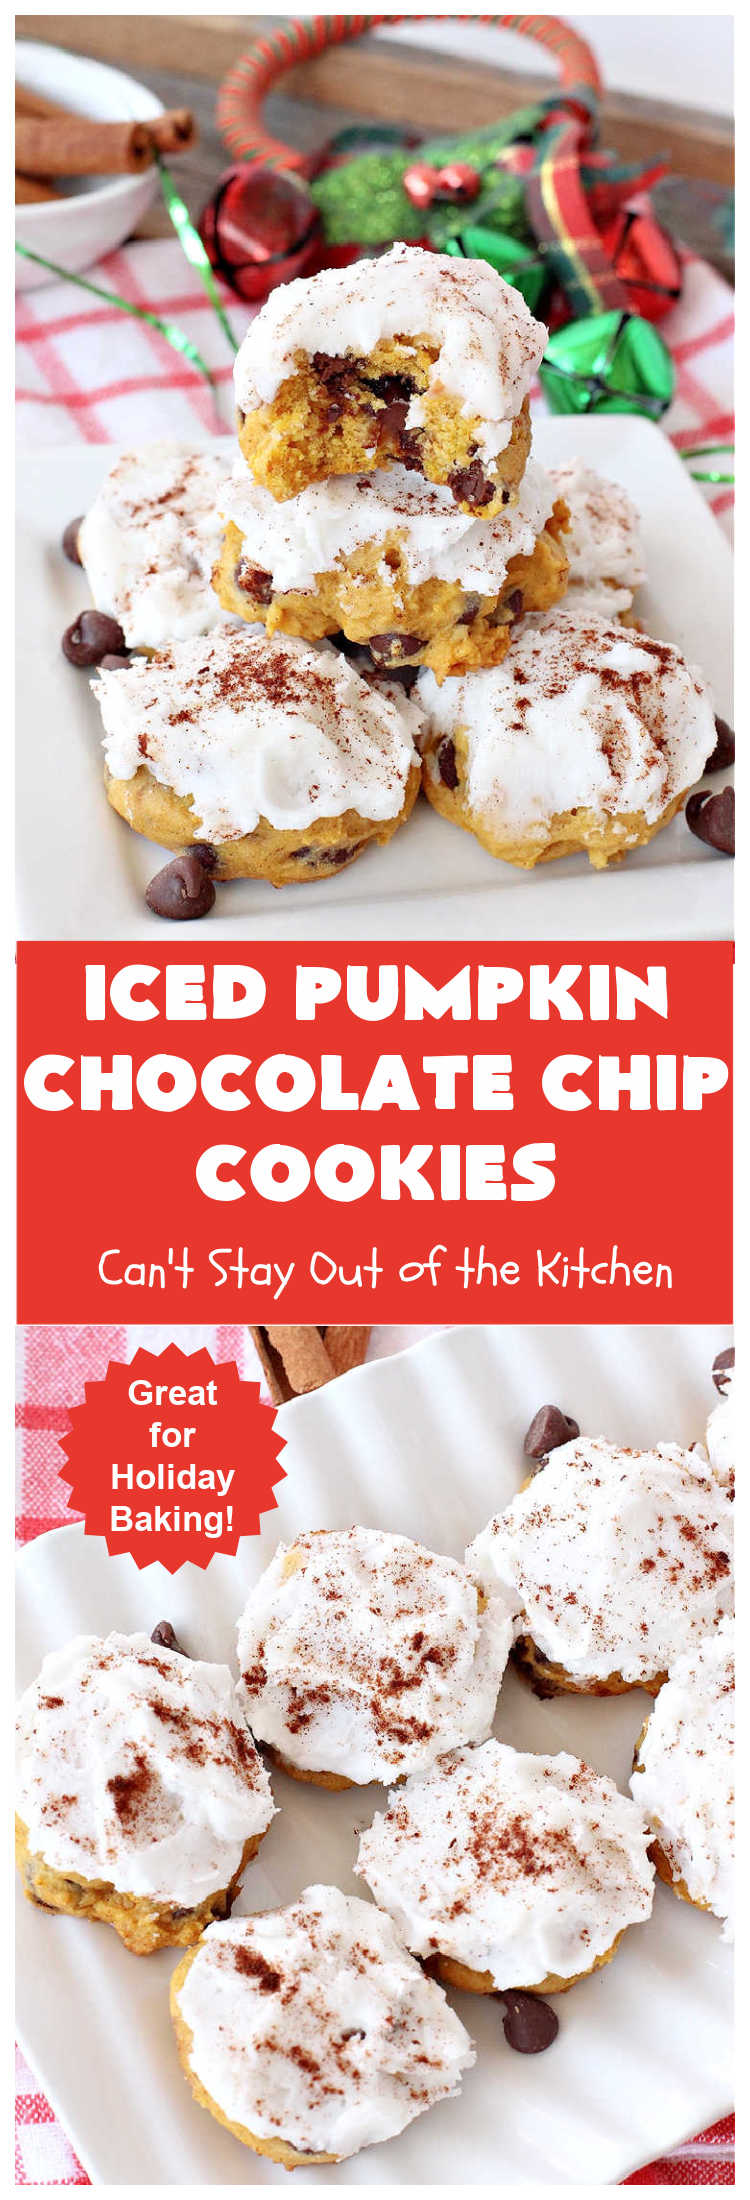 Iced Pumpkin Chocolate Chip Cookies | Can't Stay Out of the Kitchen | these spectacular #cookies have it all! #ChocolateChips, #pumpkin & icing. They're perfect for #holiday #baking & #Christmas parties or a #ChristmasCookieExchange. #dessert #PumpkinDessert #ChocolateDessert #chocolate #IcedPumpkinChocolateChipCookies